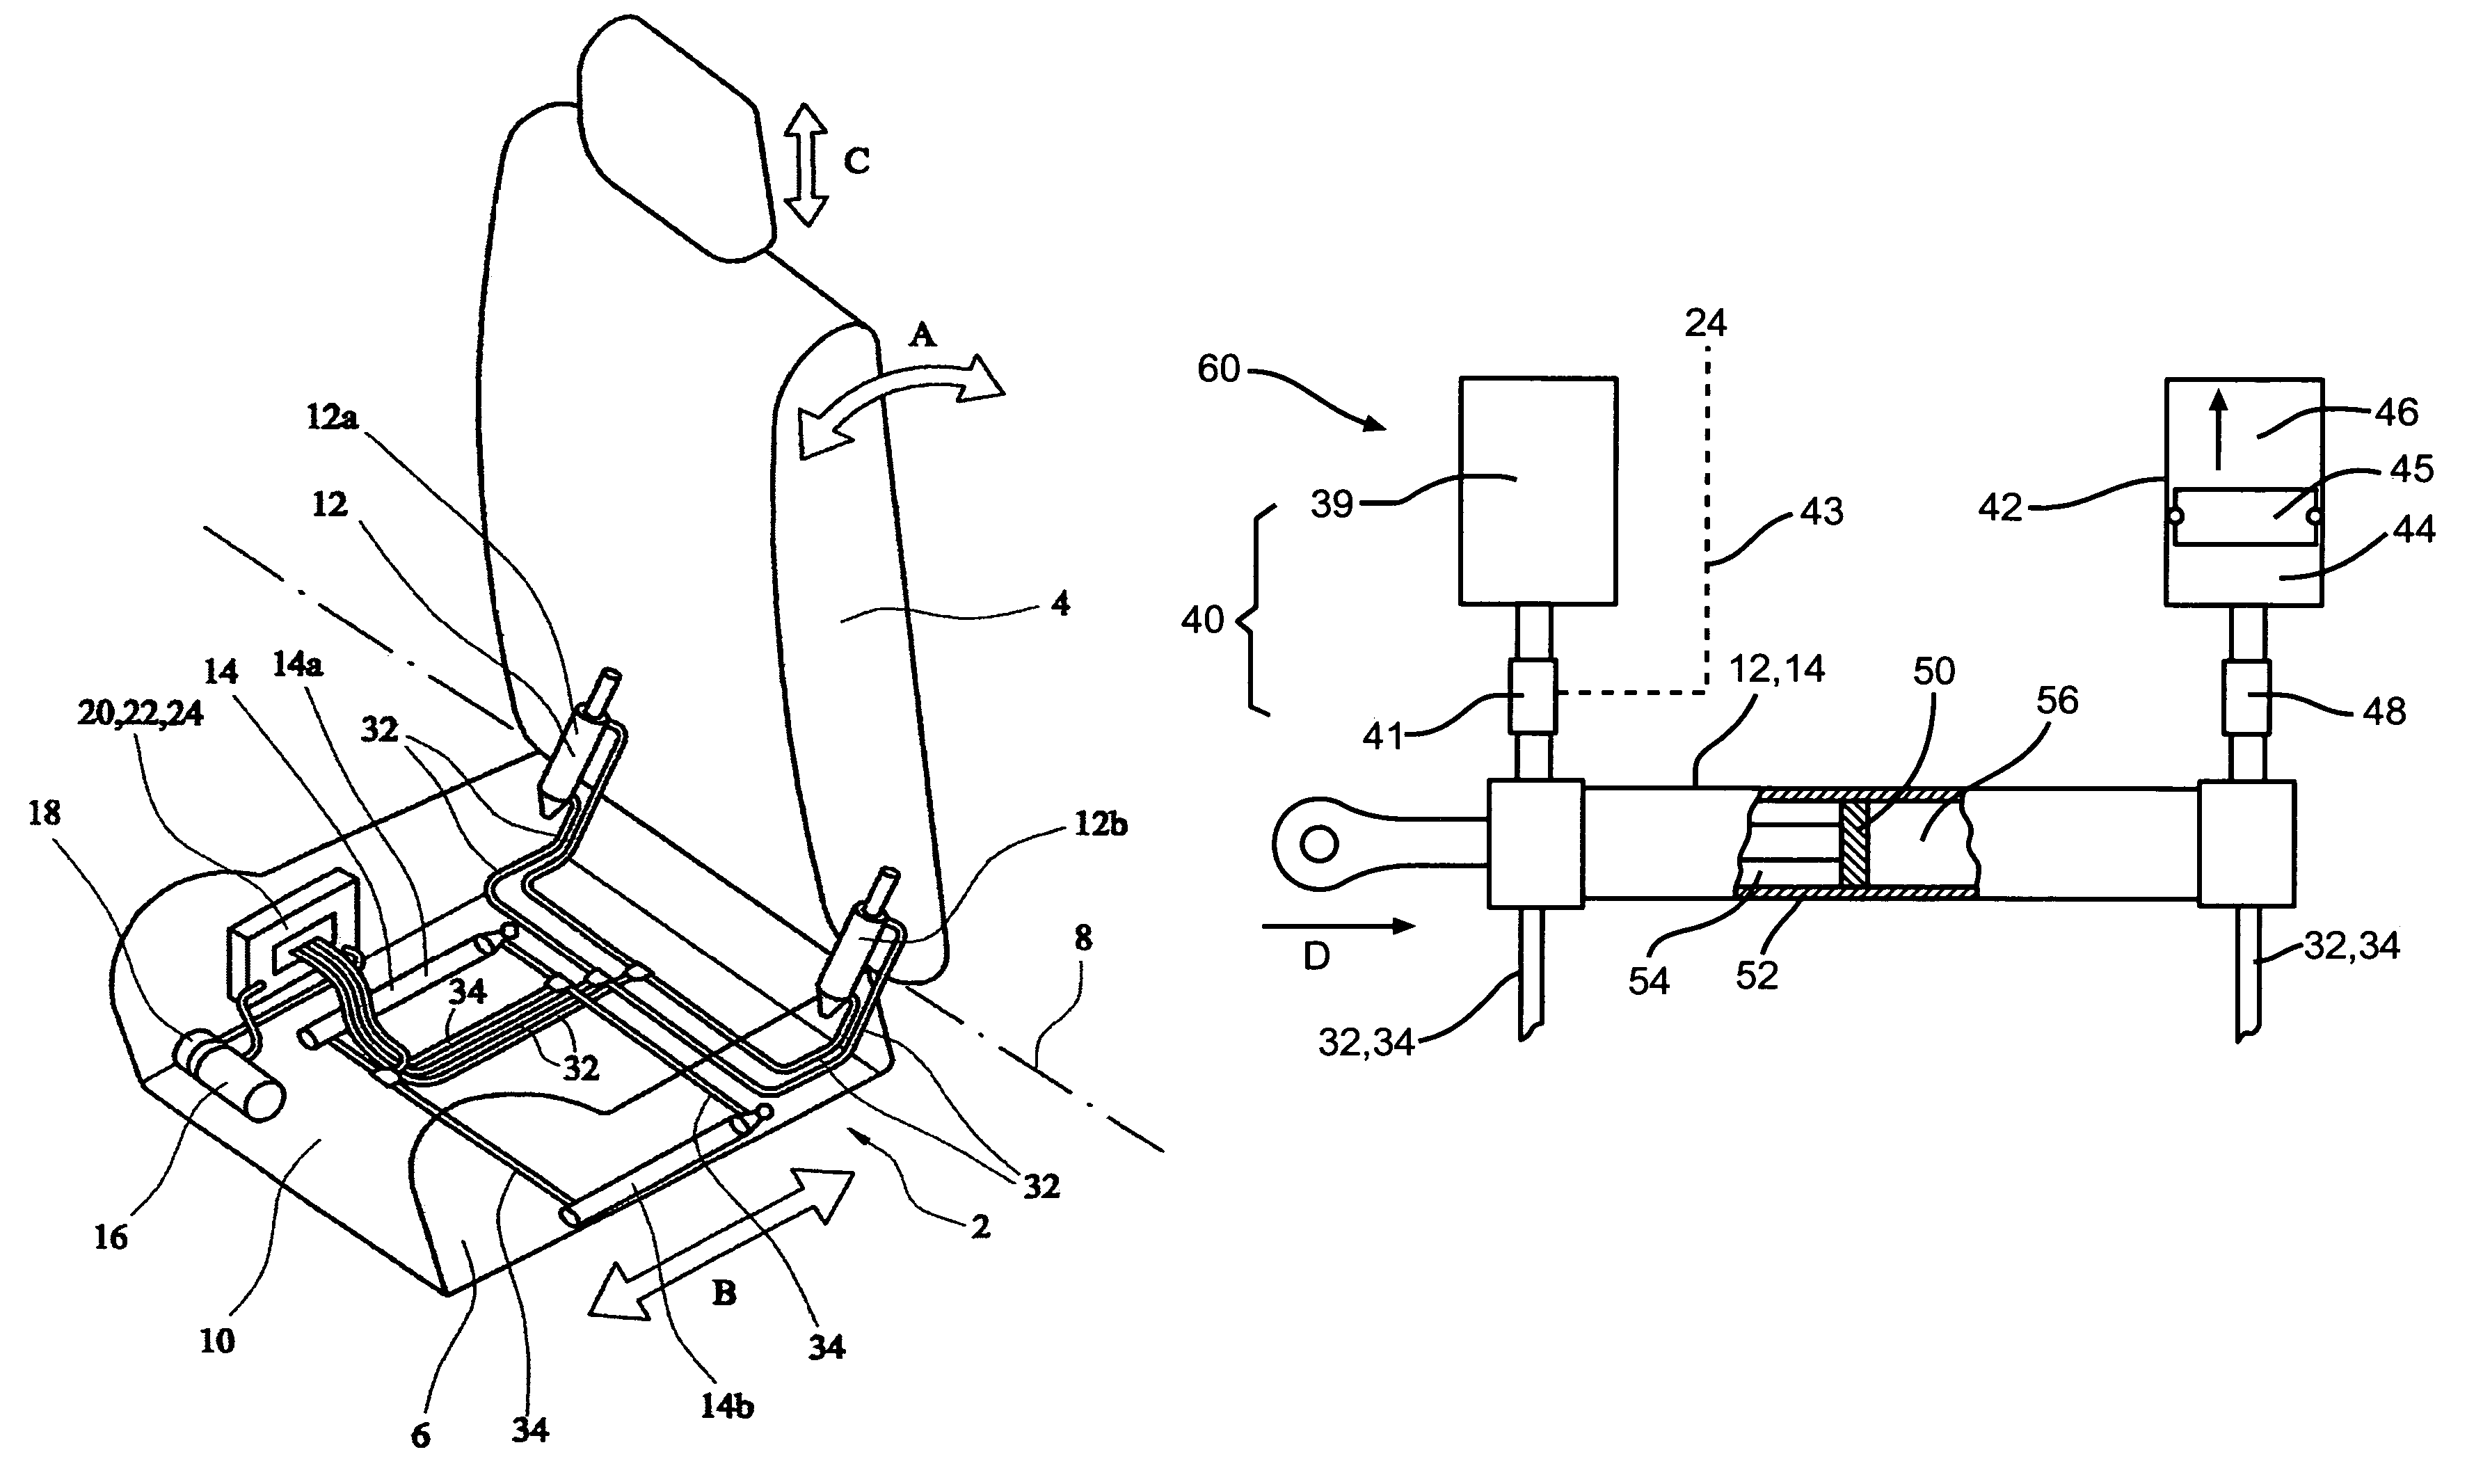 Vehicle seat adjustment system including an occupant protection adjustment